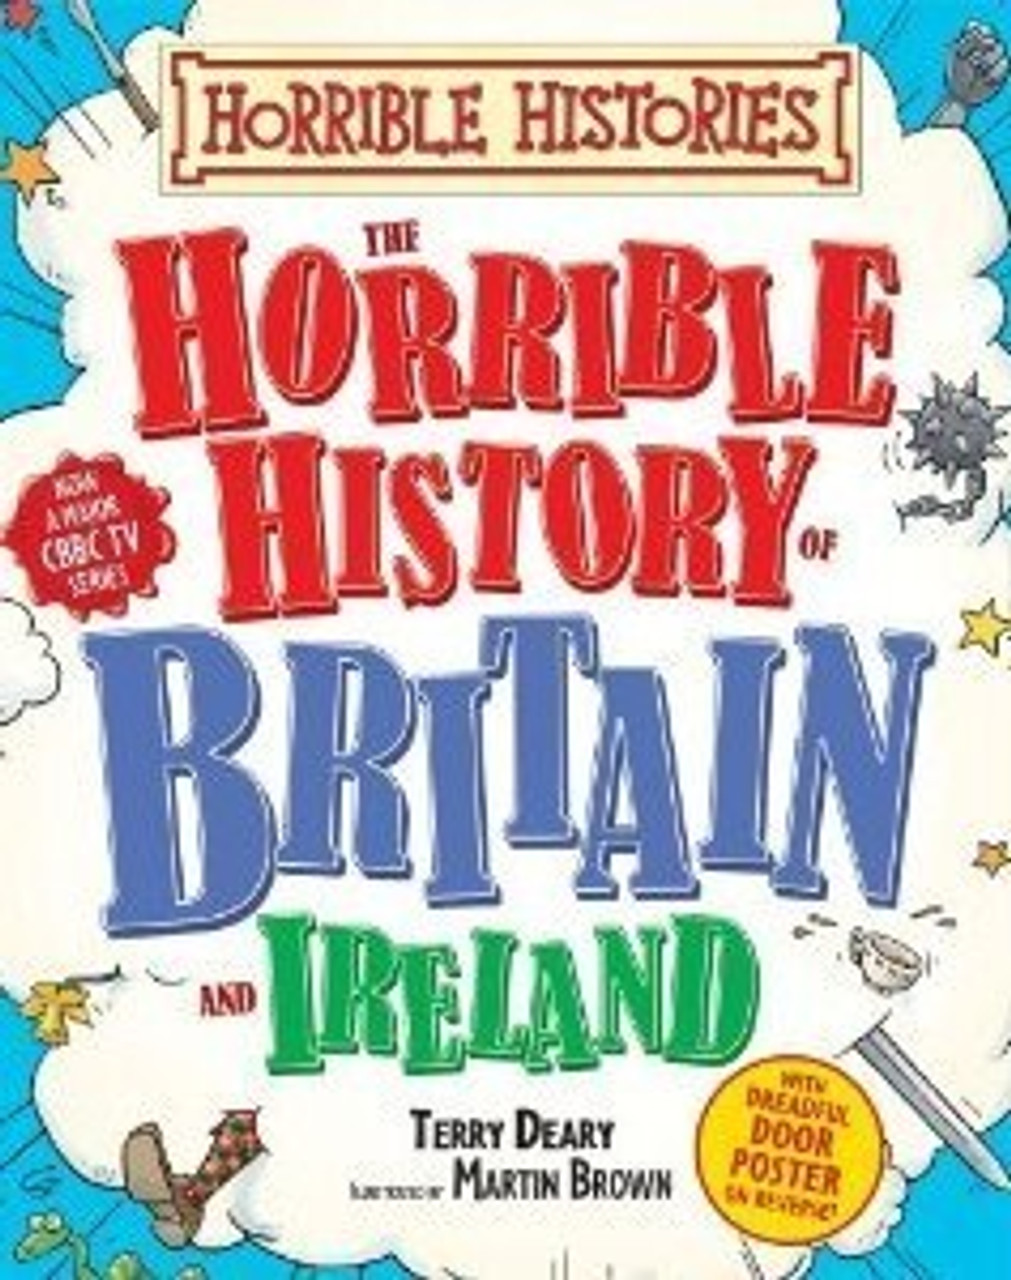 Terry Deary / The Horrible History Of Britain And Ireland (Children's Coffee Table book)